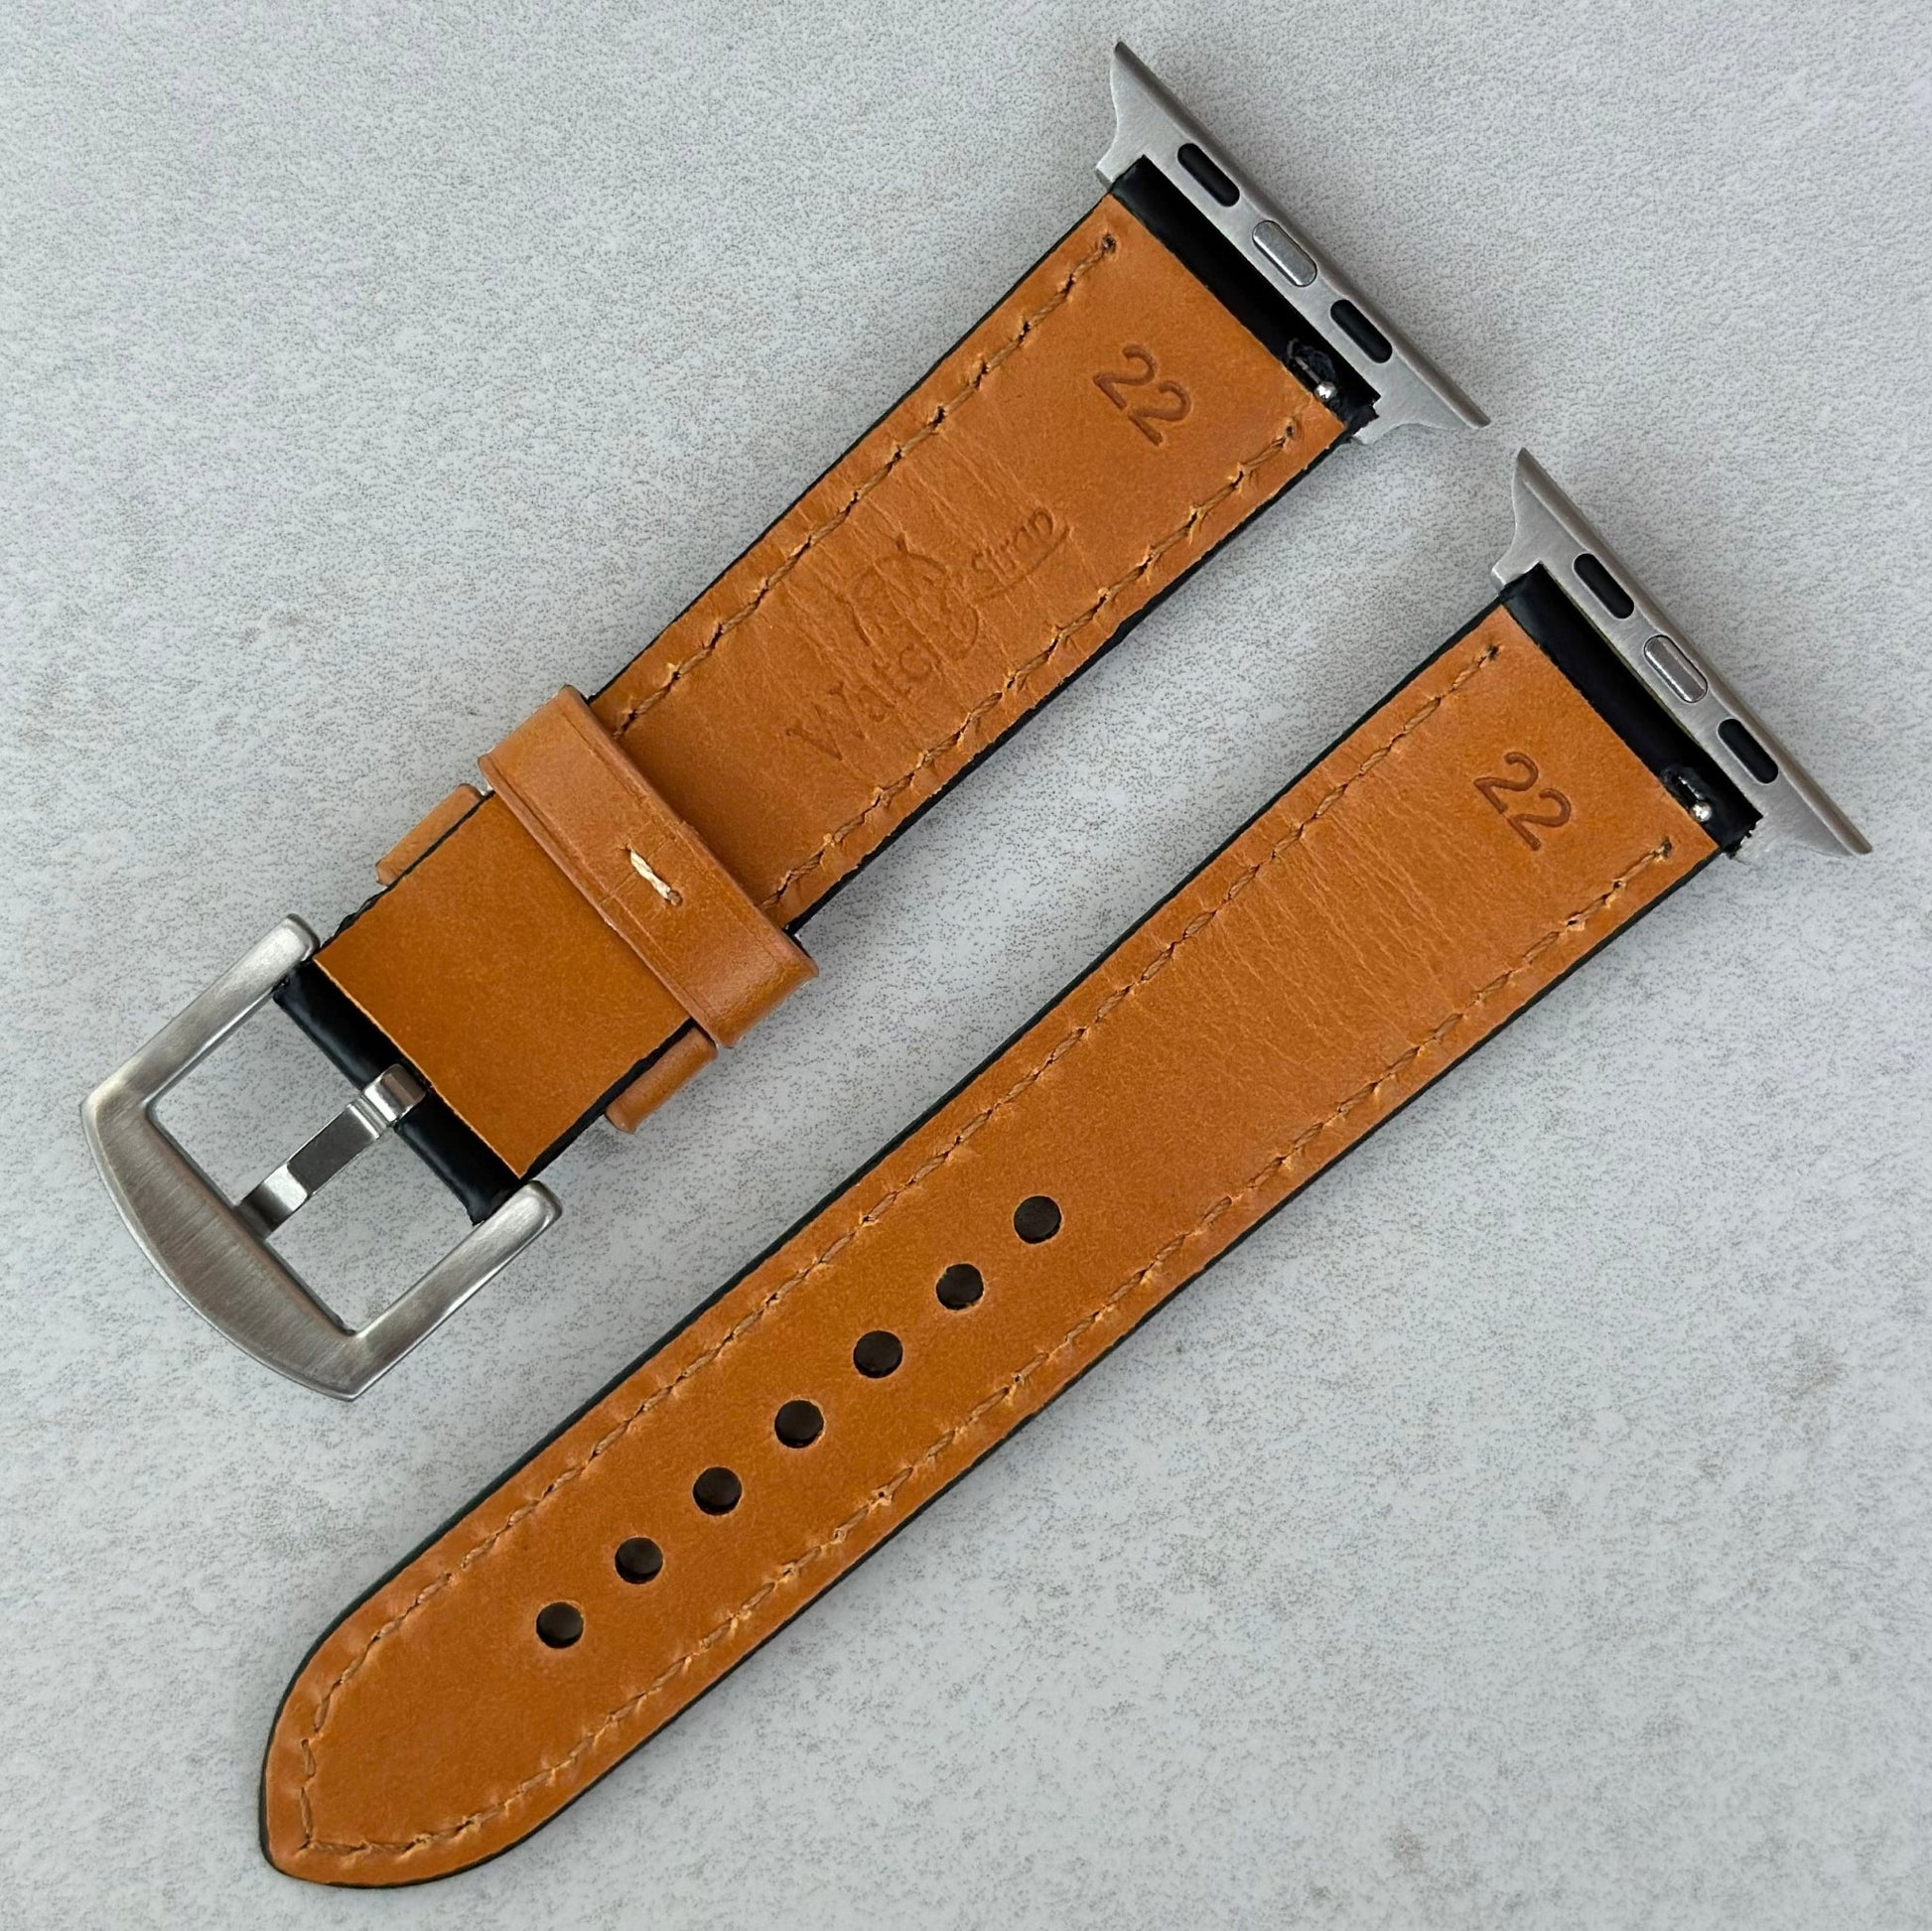 Rear of the Oxford black full grain leather watch strap. Tan underside. Watch And Strap logo.